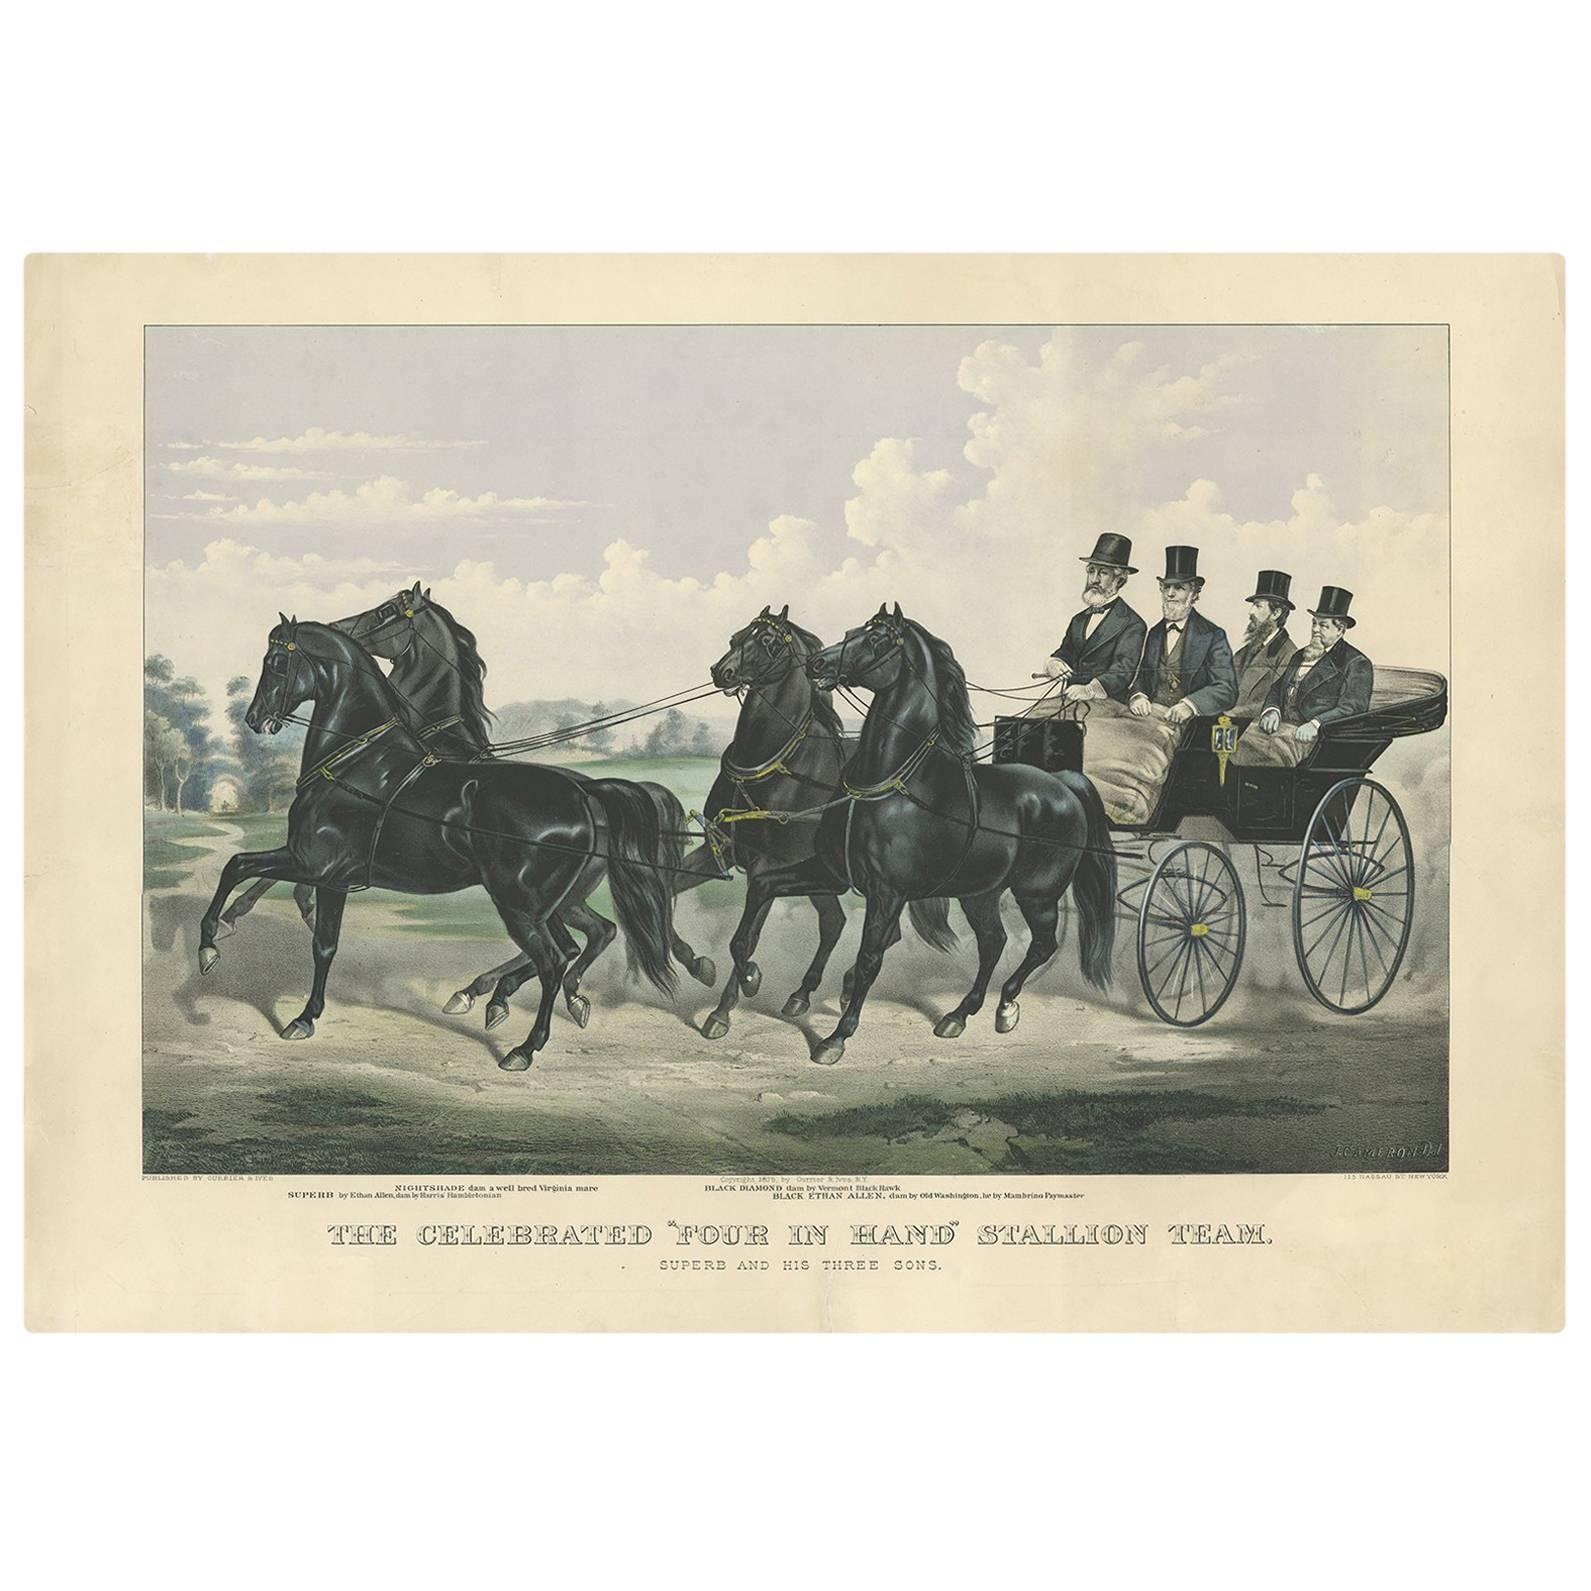 Antique Horse Print of the 'Four in Hand' Stallion Team by Currier & Ives, 1875